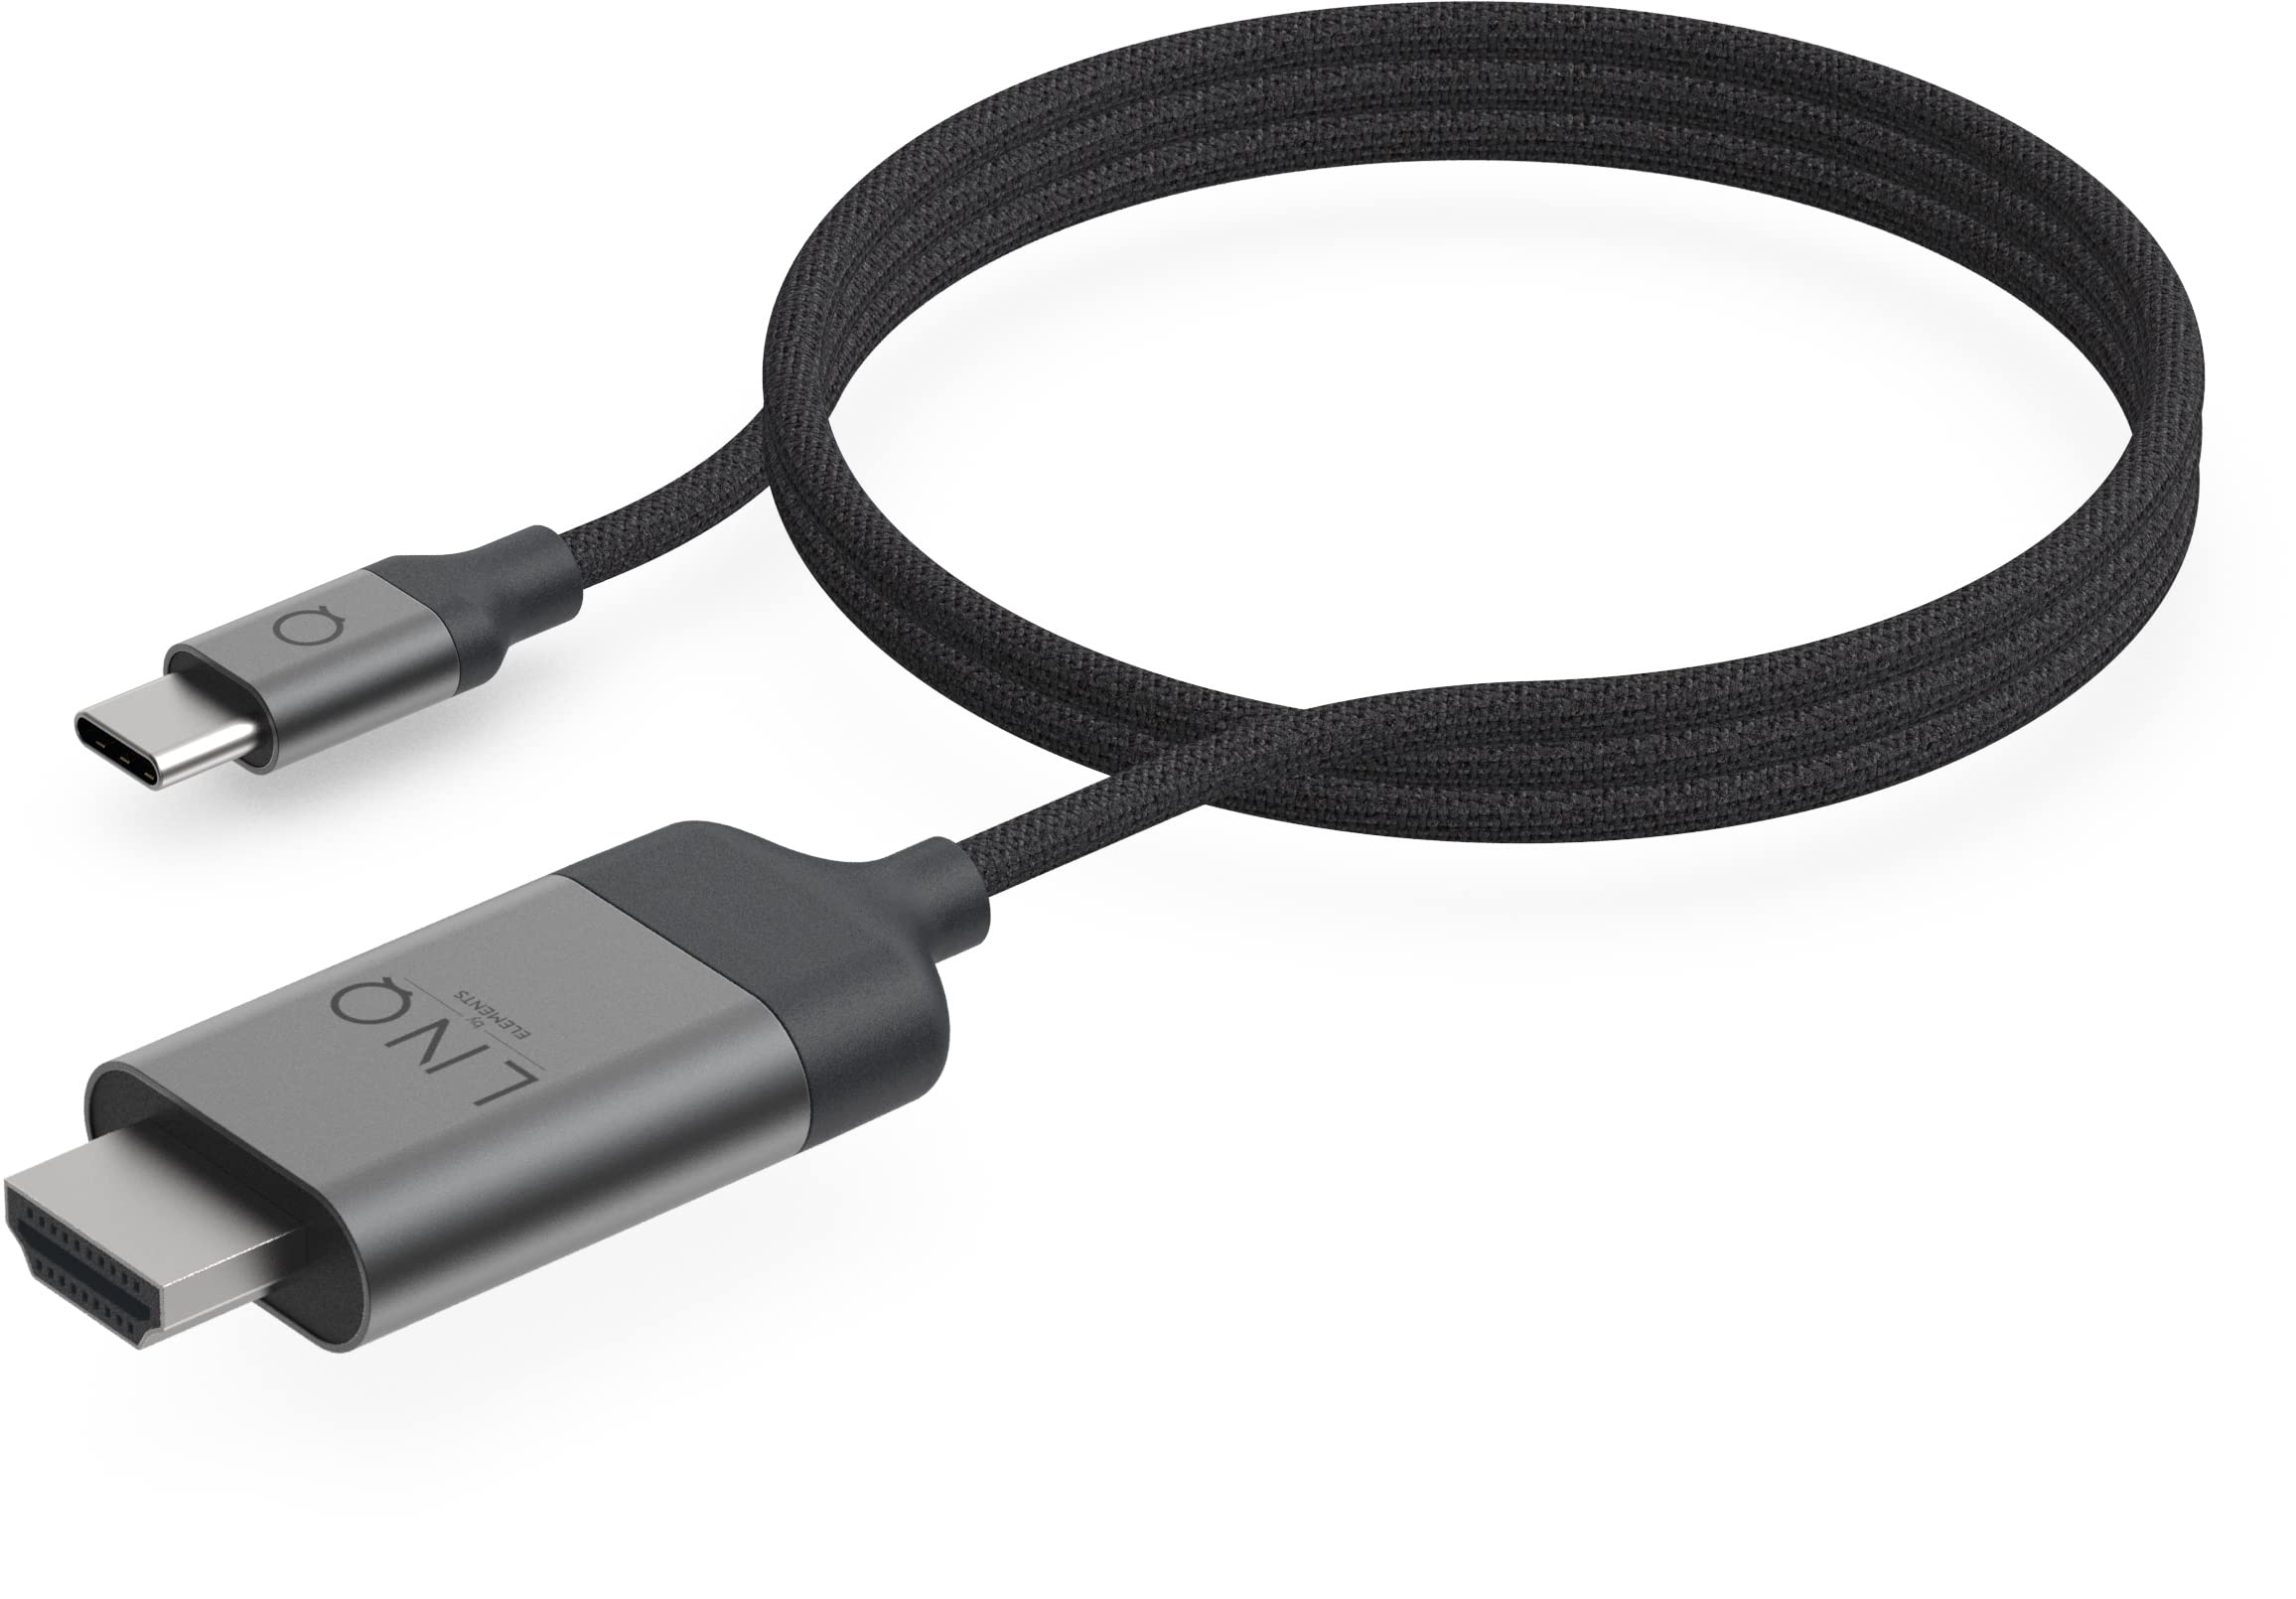 4K HDMI ADAPTER 2M CABLE